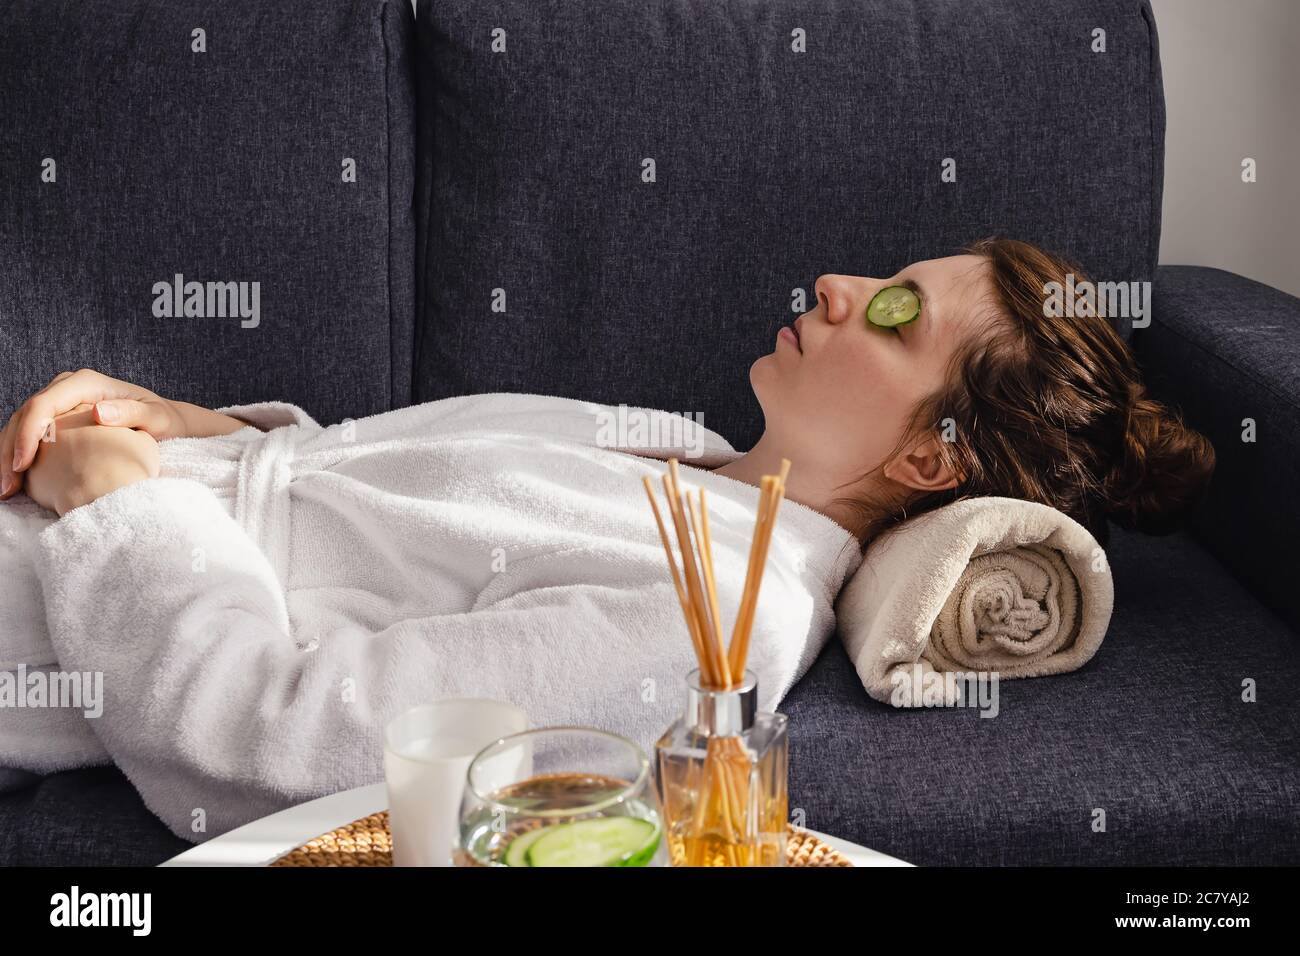 Young relaxing woman in bathrobe applying cucumbers on eyes at home. Self care routine, wellbeing Stock Photo